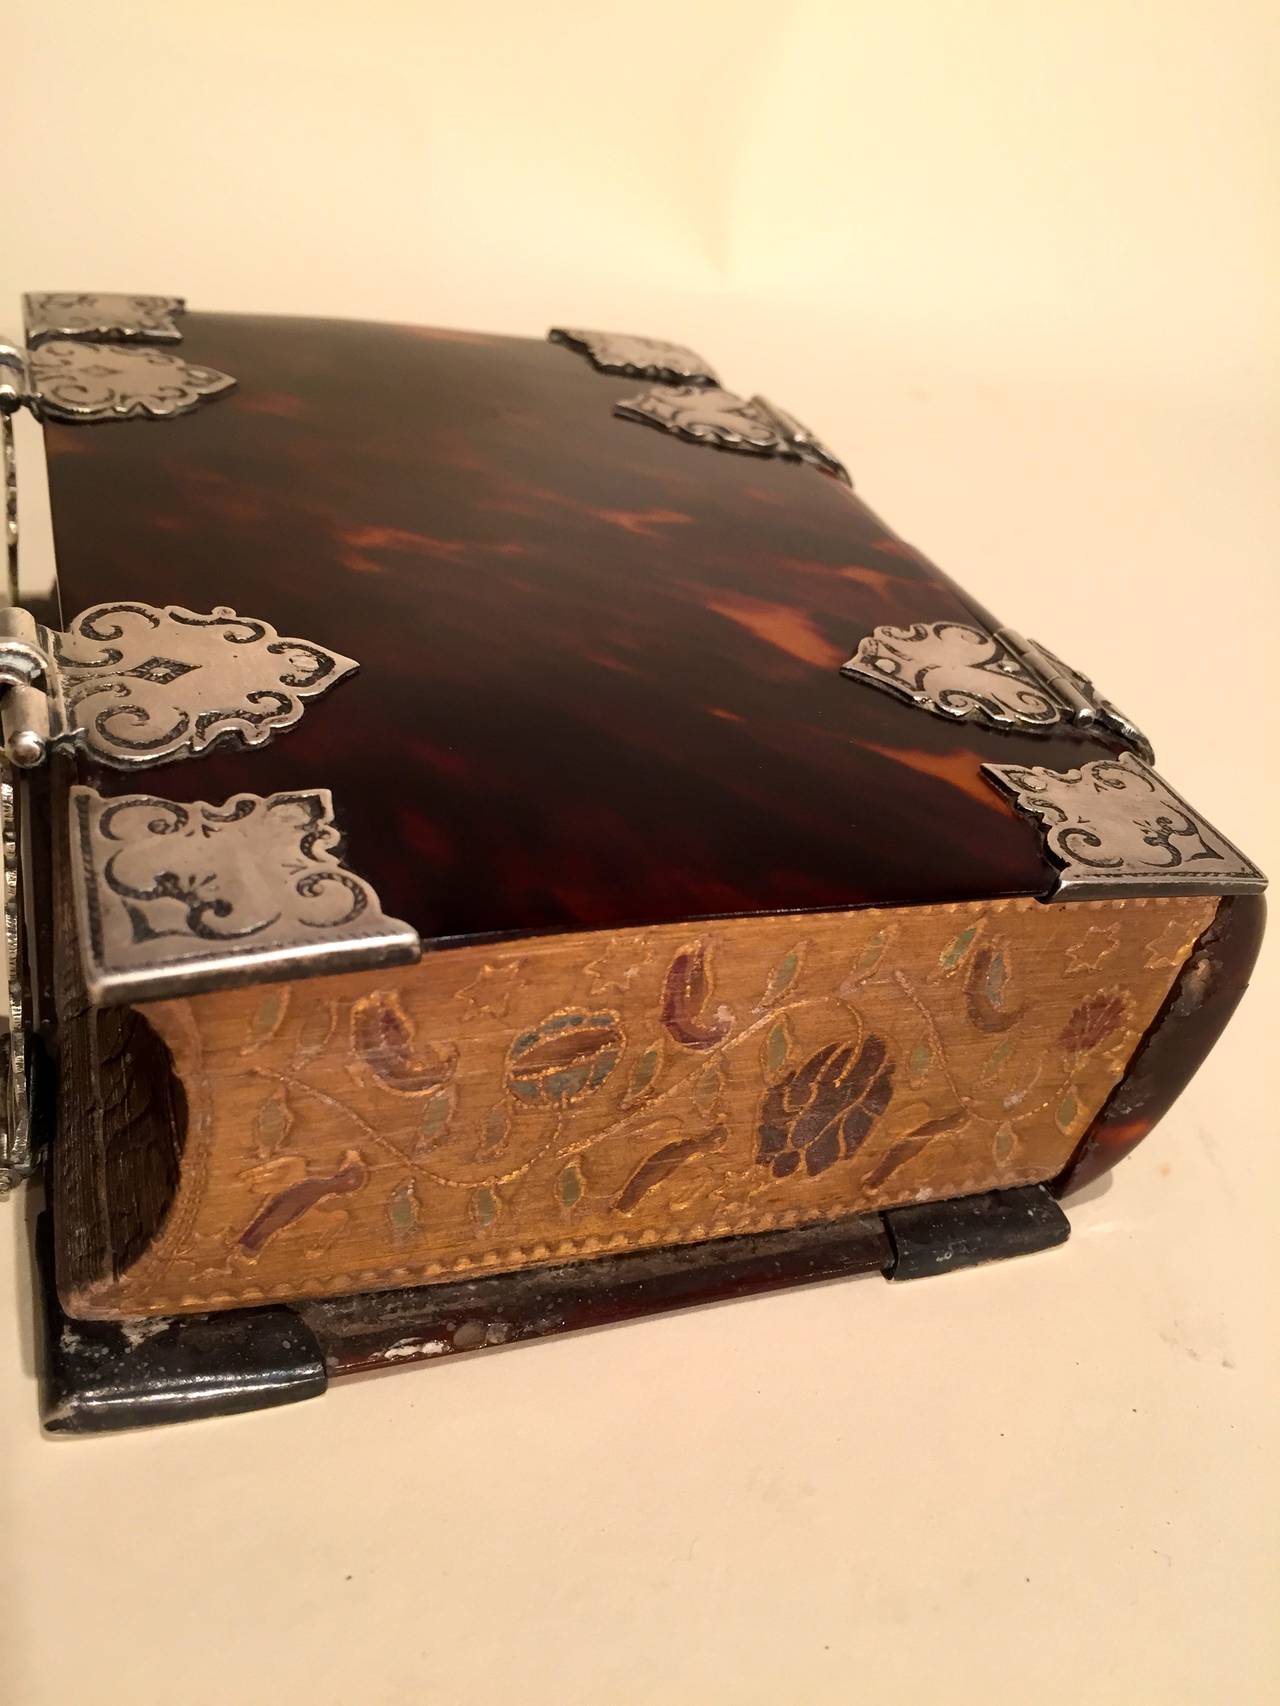 Exceptional Flemish Tortoiseshell and Silver Mounted Book , 1706 For Sale 1